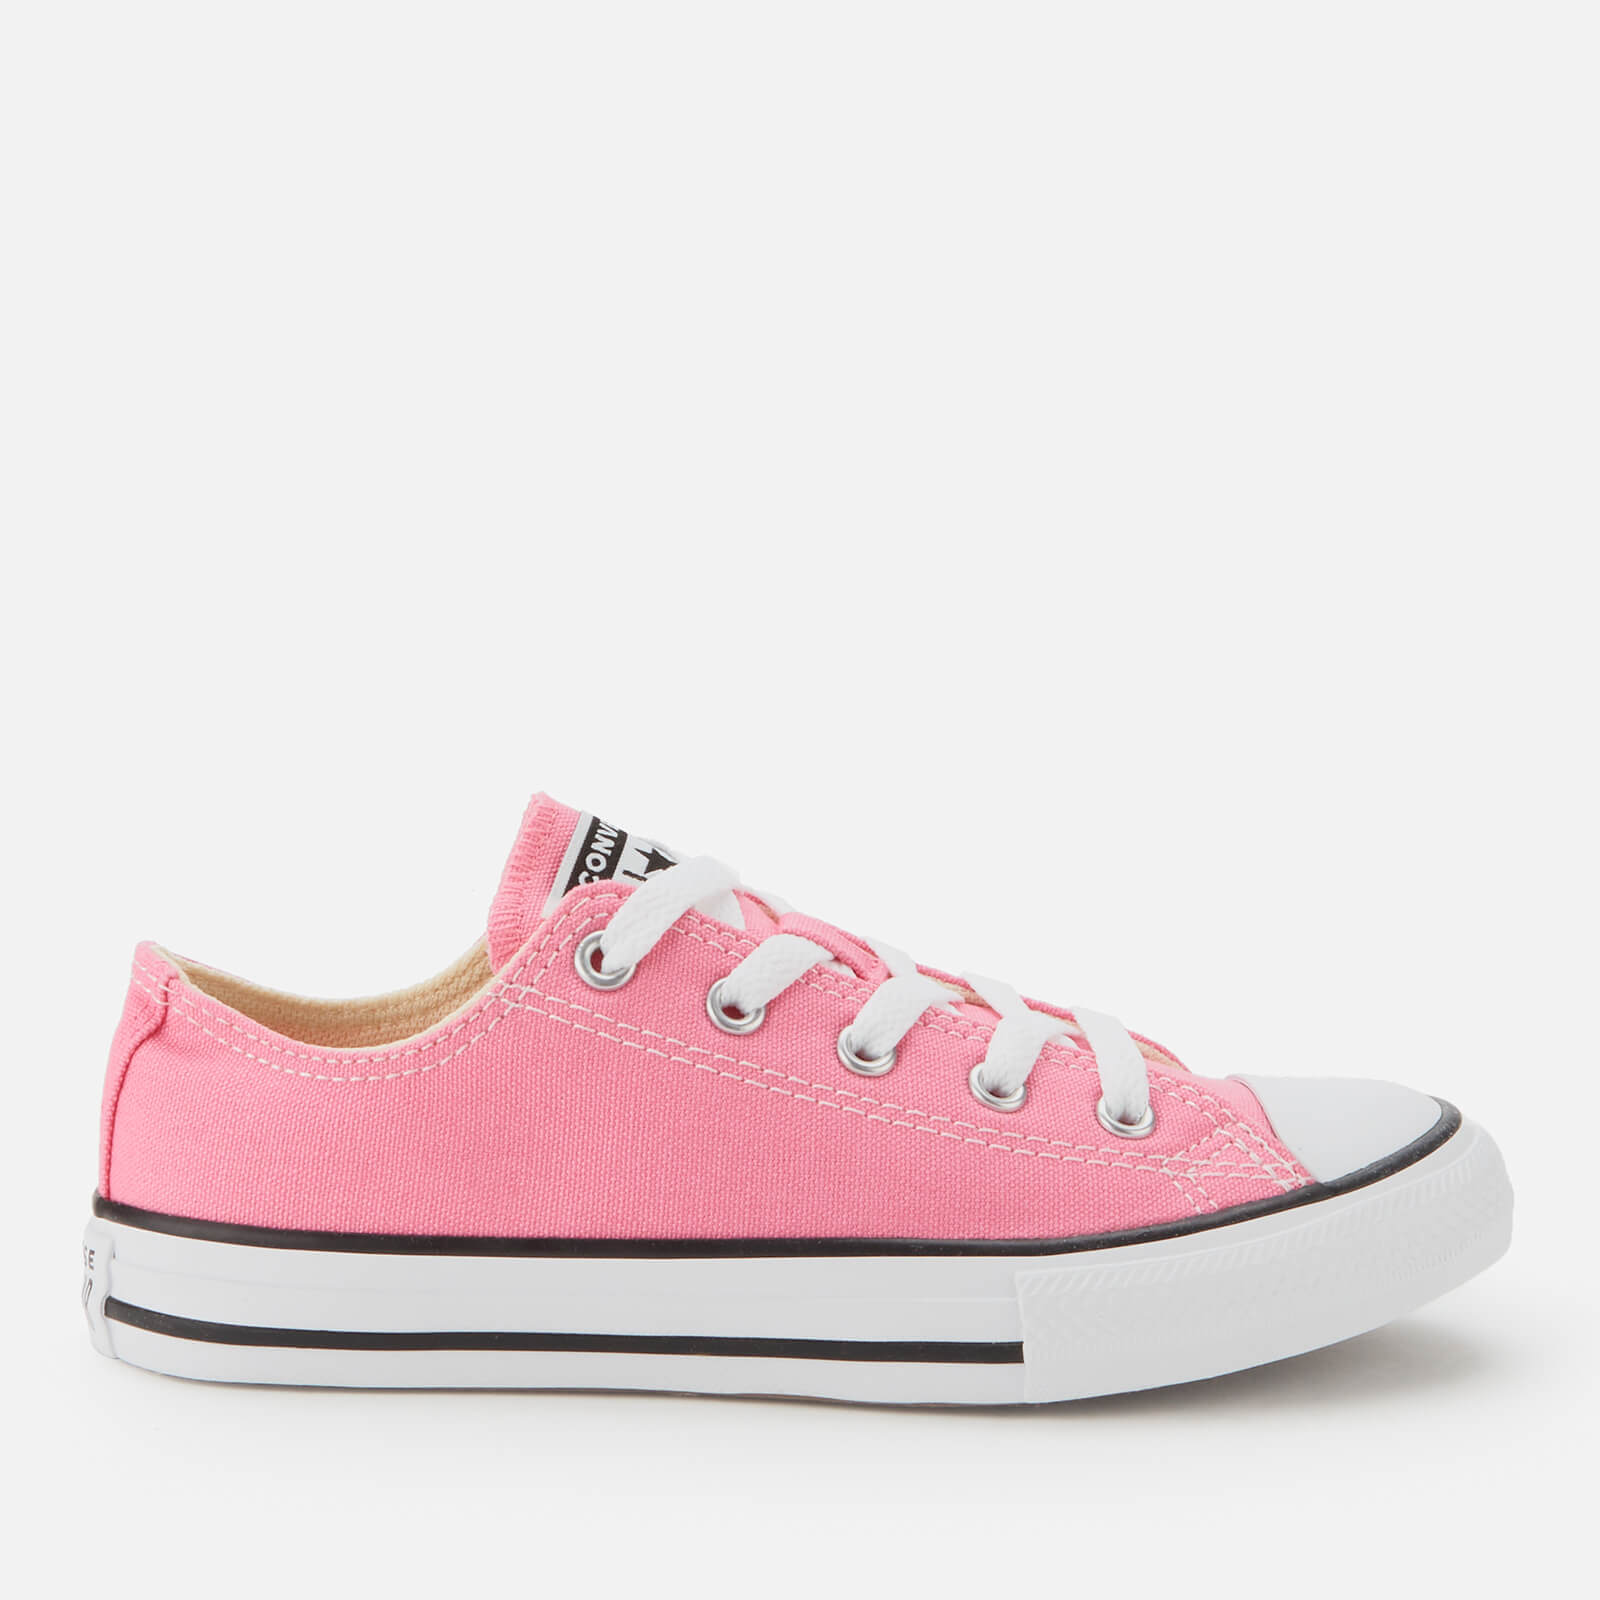 Converse Kids' Chuck Taylor All Star Ox Trainers - Pink - UK 2 Kids